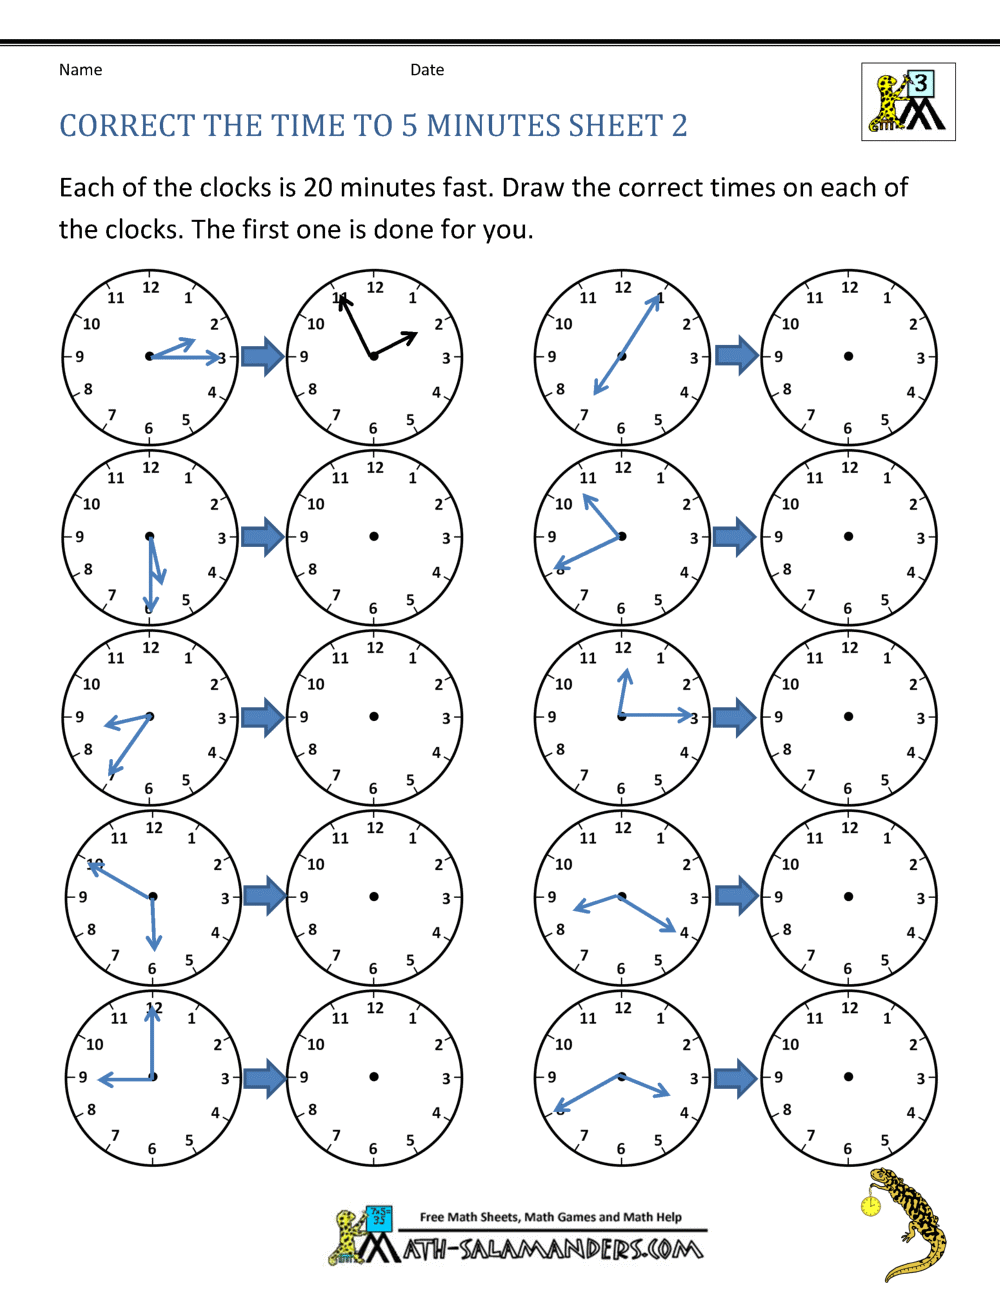 Telling Time Clock Worksheets to 5 minutes